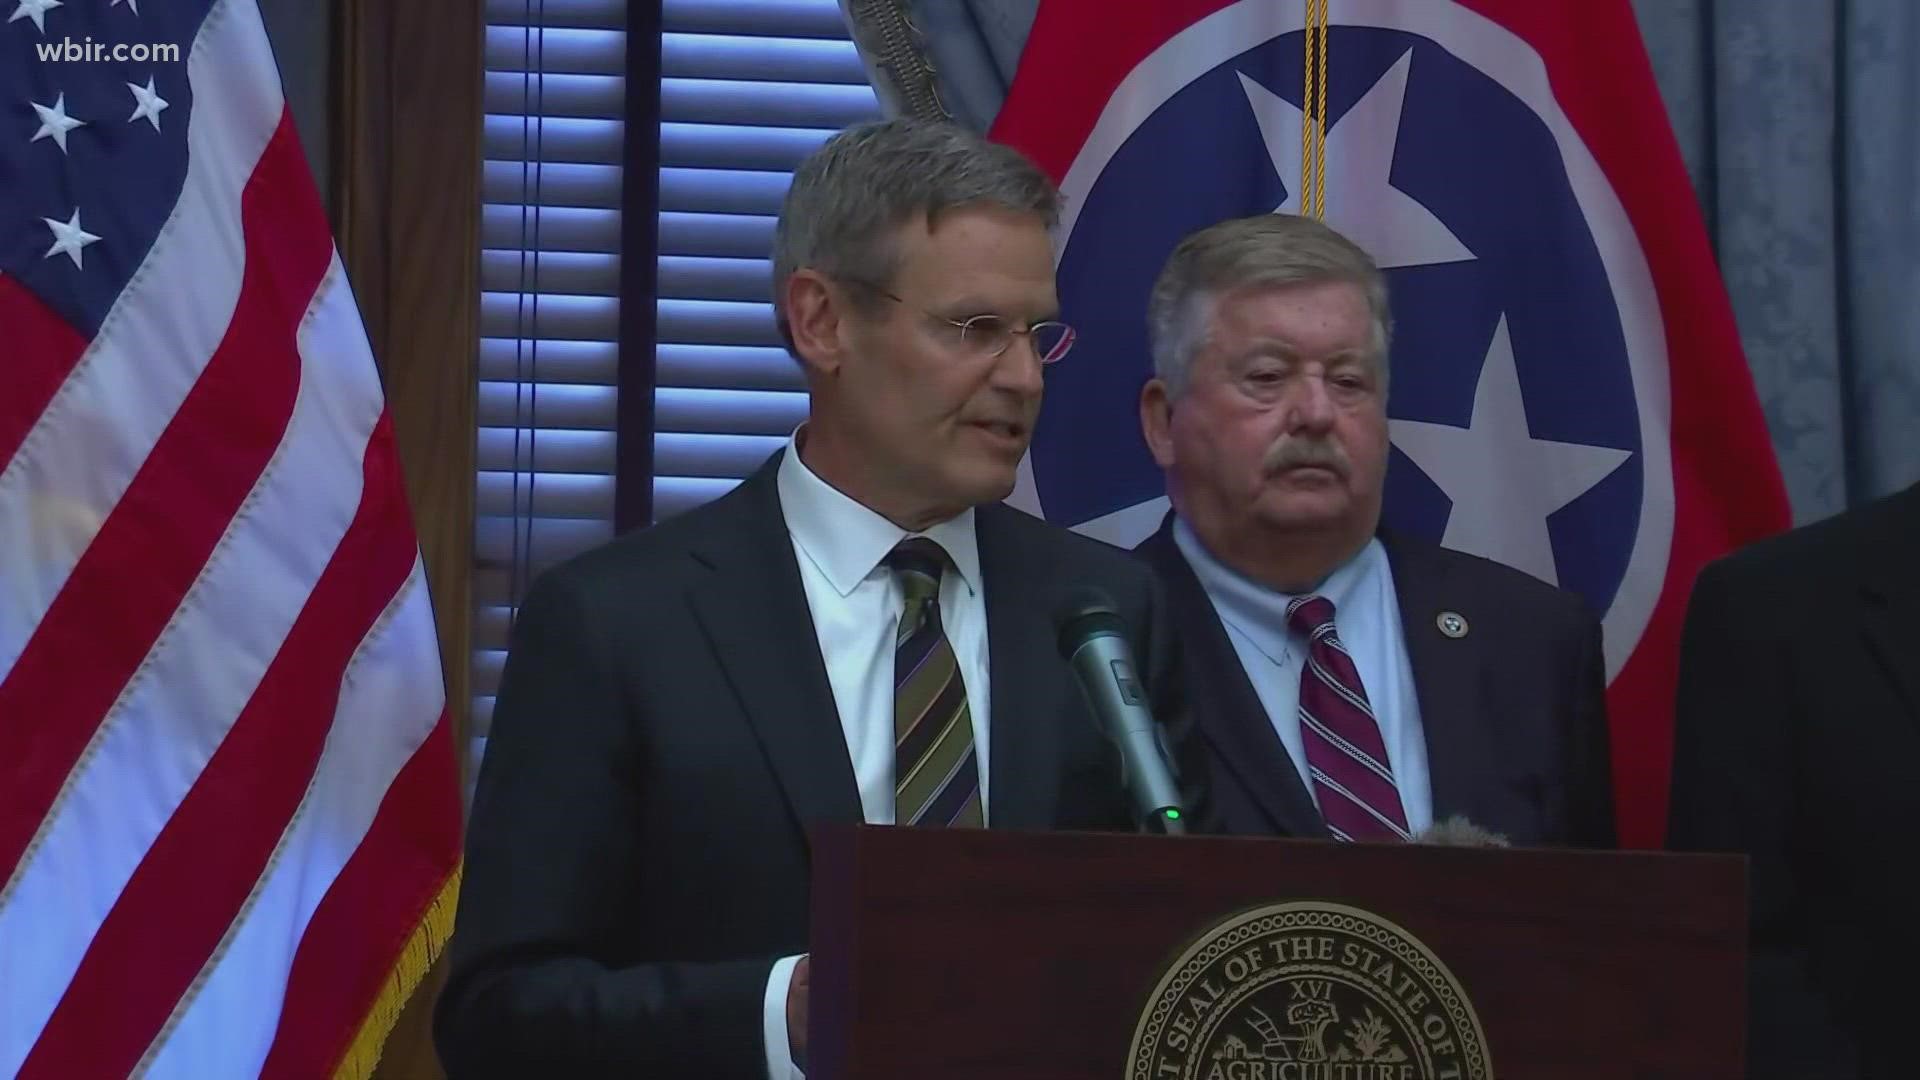 Governor Bill Lee said he plans to oppose President Joe Biden's mandate that businesses require employees to get vaccines for COVID-19.